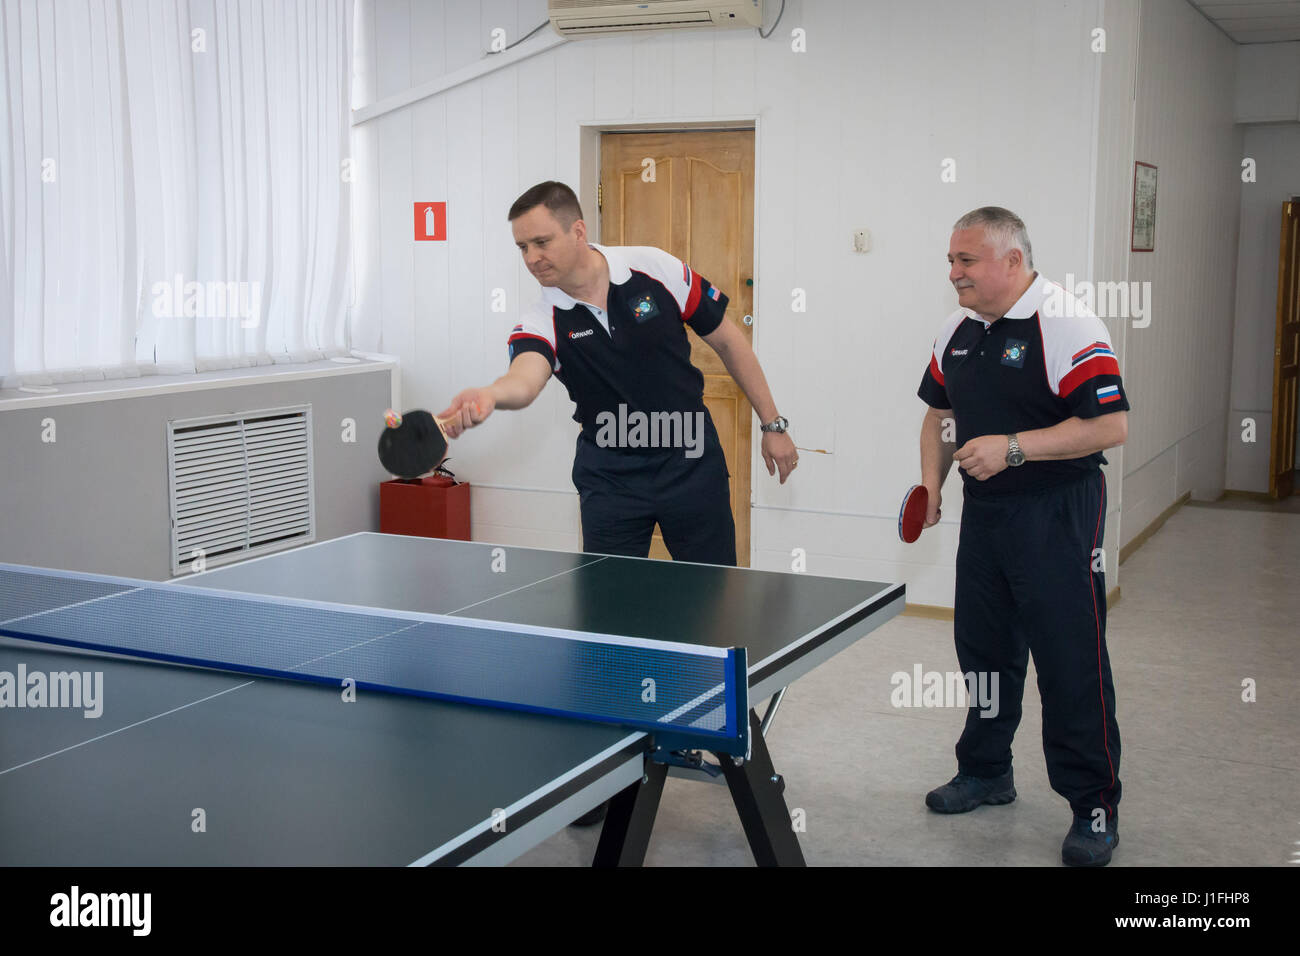 NASA International Space Station Expedition 51 Soyuz MS-04 mission prime crew members American astronaut Jack Fischer (left) and Russian cosmonaut Fyodor Yurchikhin of Roscosmos play a game of ping-pong during pre-launch activities at the Cosmonaut Hotel April 13, 2017 in Baikonur, Kazakhstan.       (photo by Victor Zelentsov /NASA   via Planetpix) Stock Photo